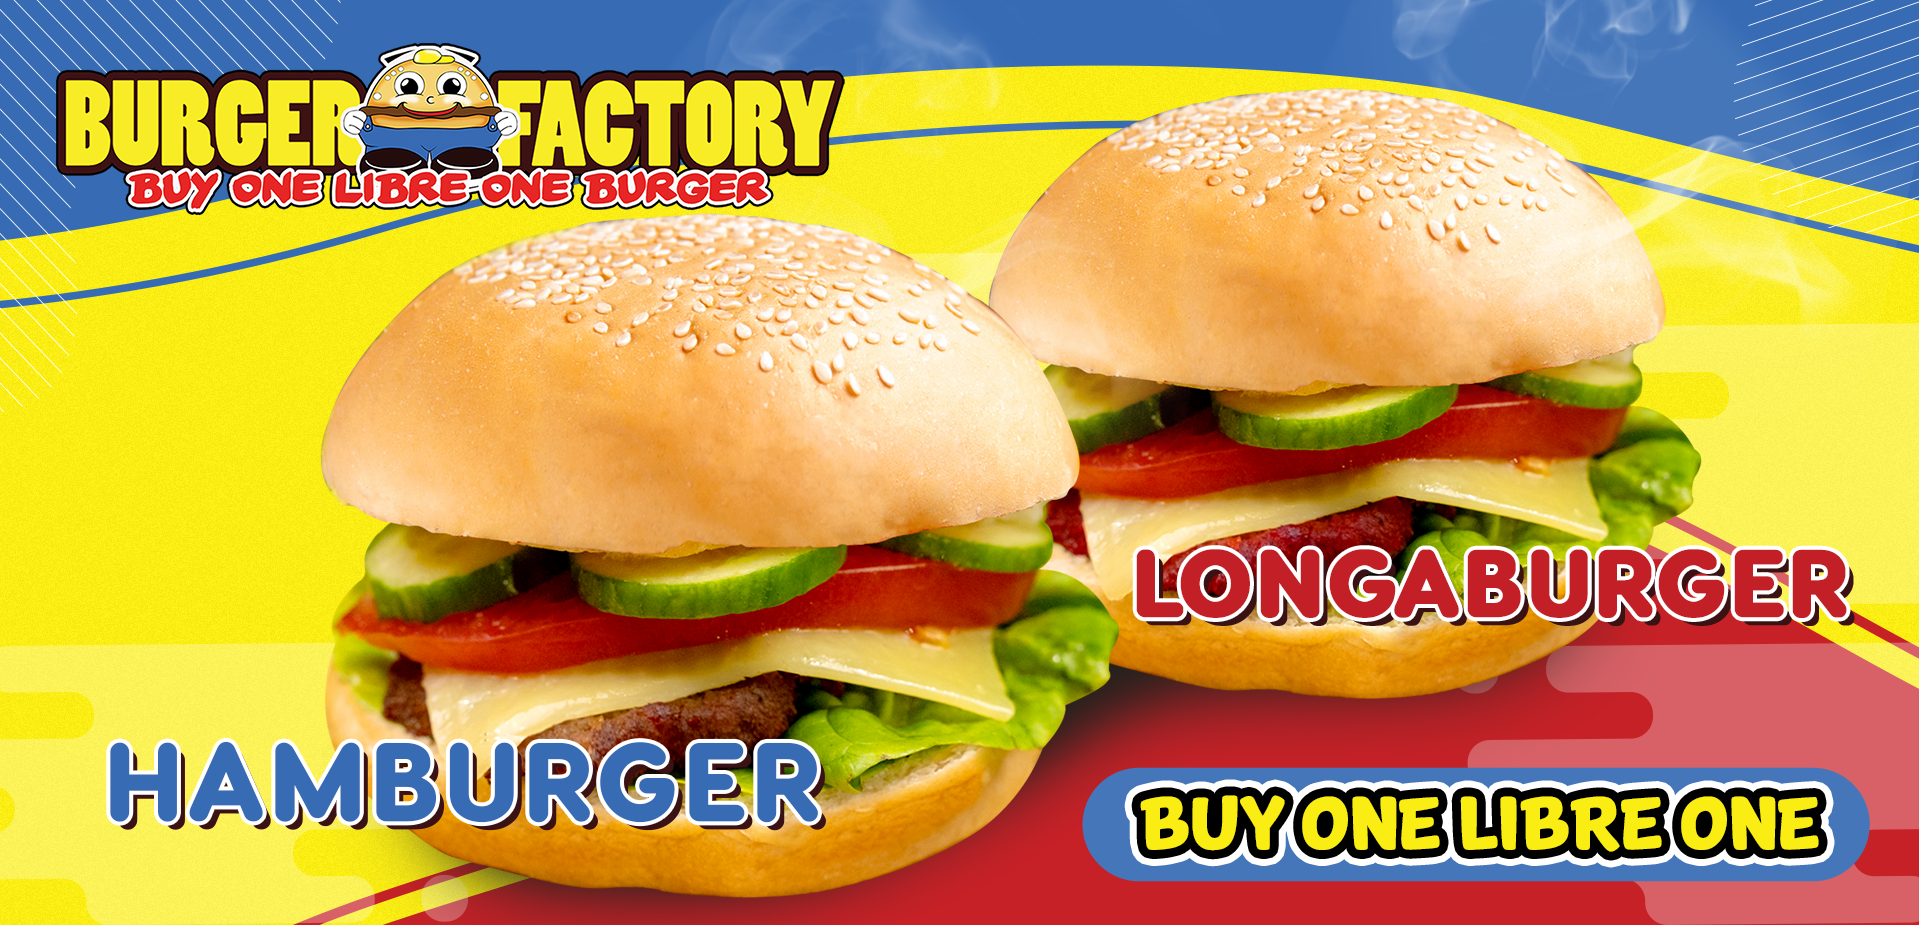 How to franchise Burger Factory Food Cart